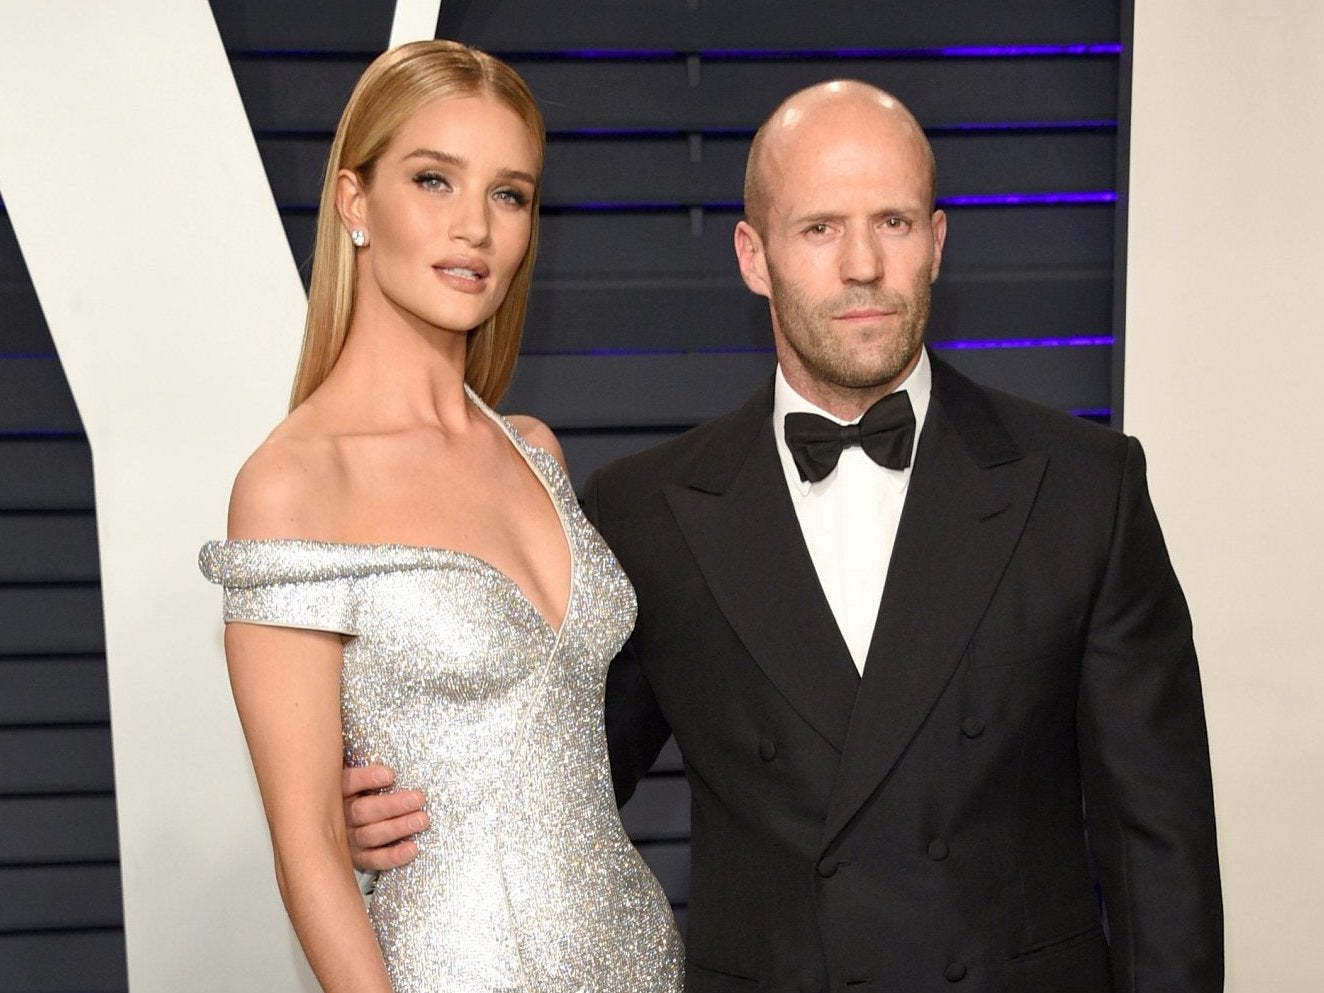 Oscars 2019: The best celebrity couples on the Academy Awards red carpet | The Independent1324 x 993